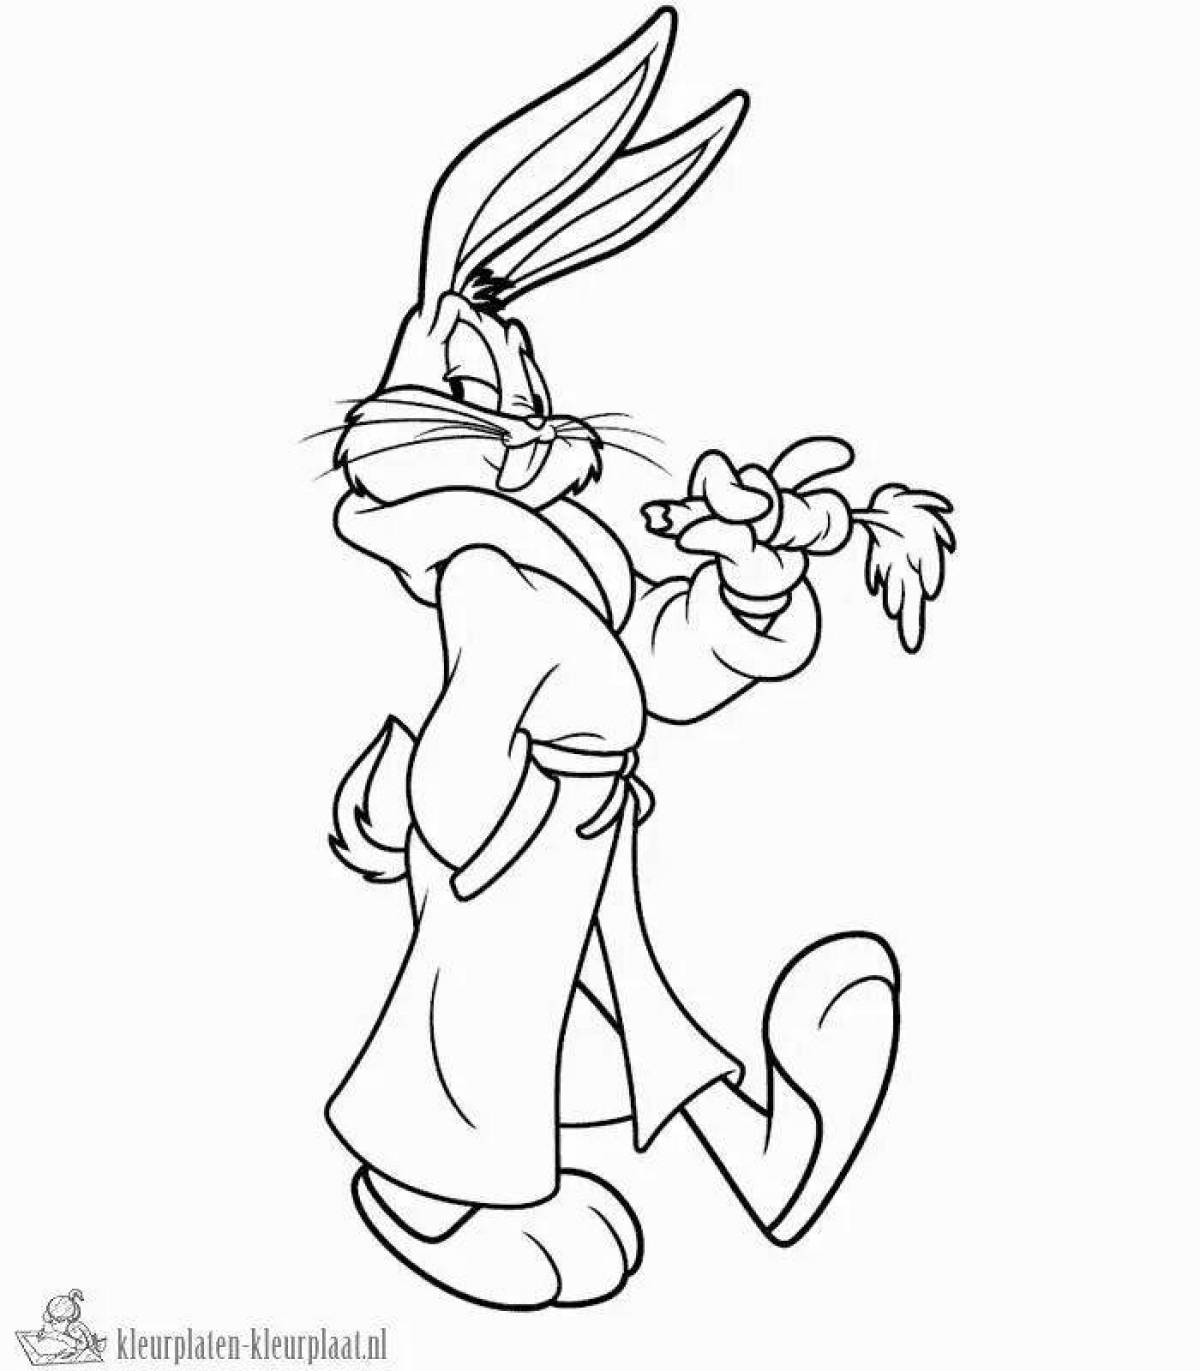 Funny Bugs Bunny coloring page